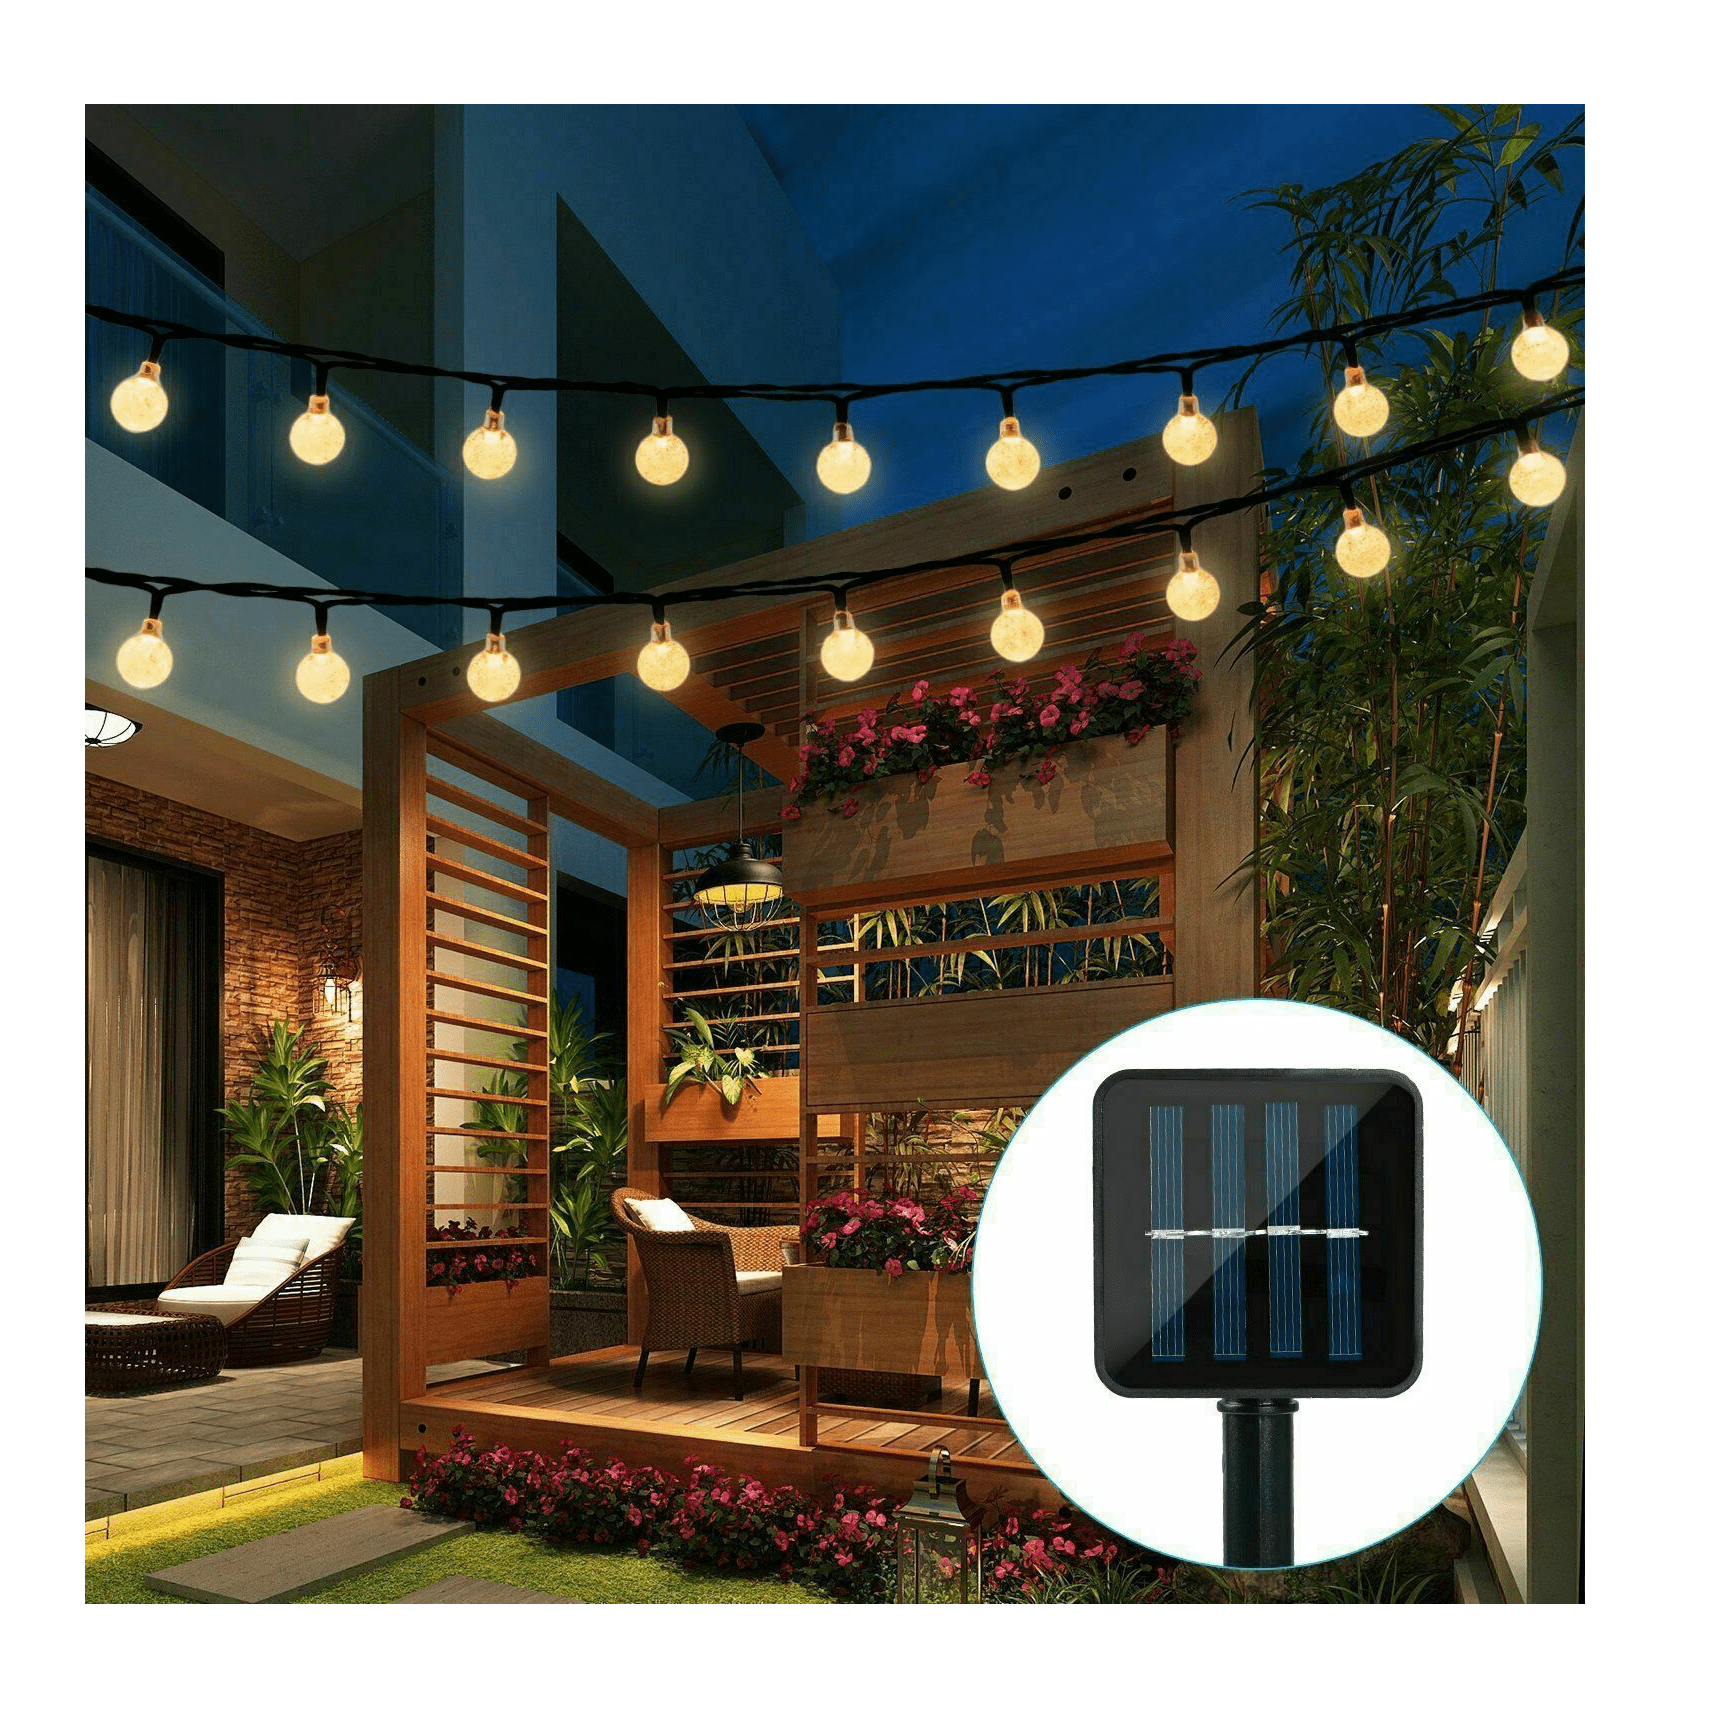 Details about   Solar Powered 50 LED String Light Outdoor Garden Path Yard Waterproof Decor Lamp 